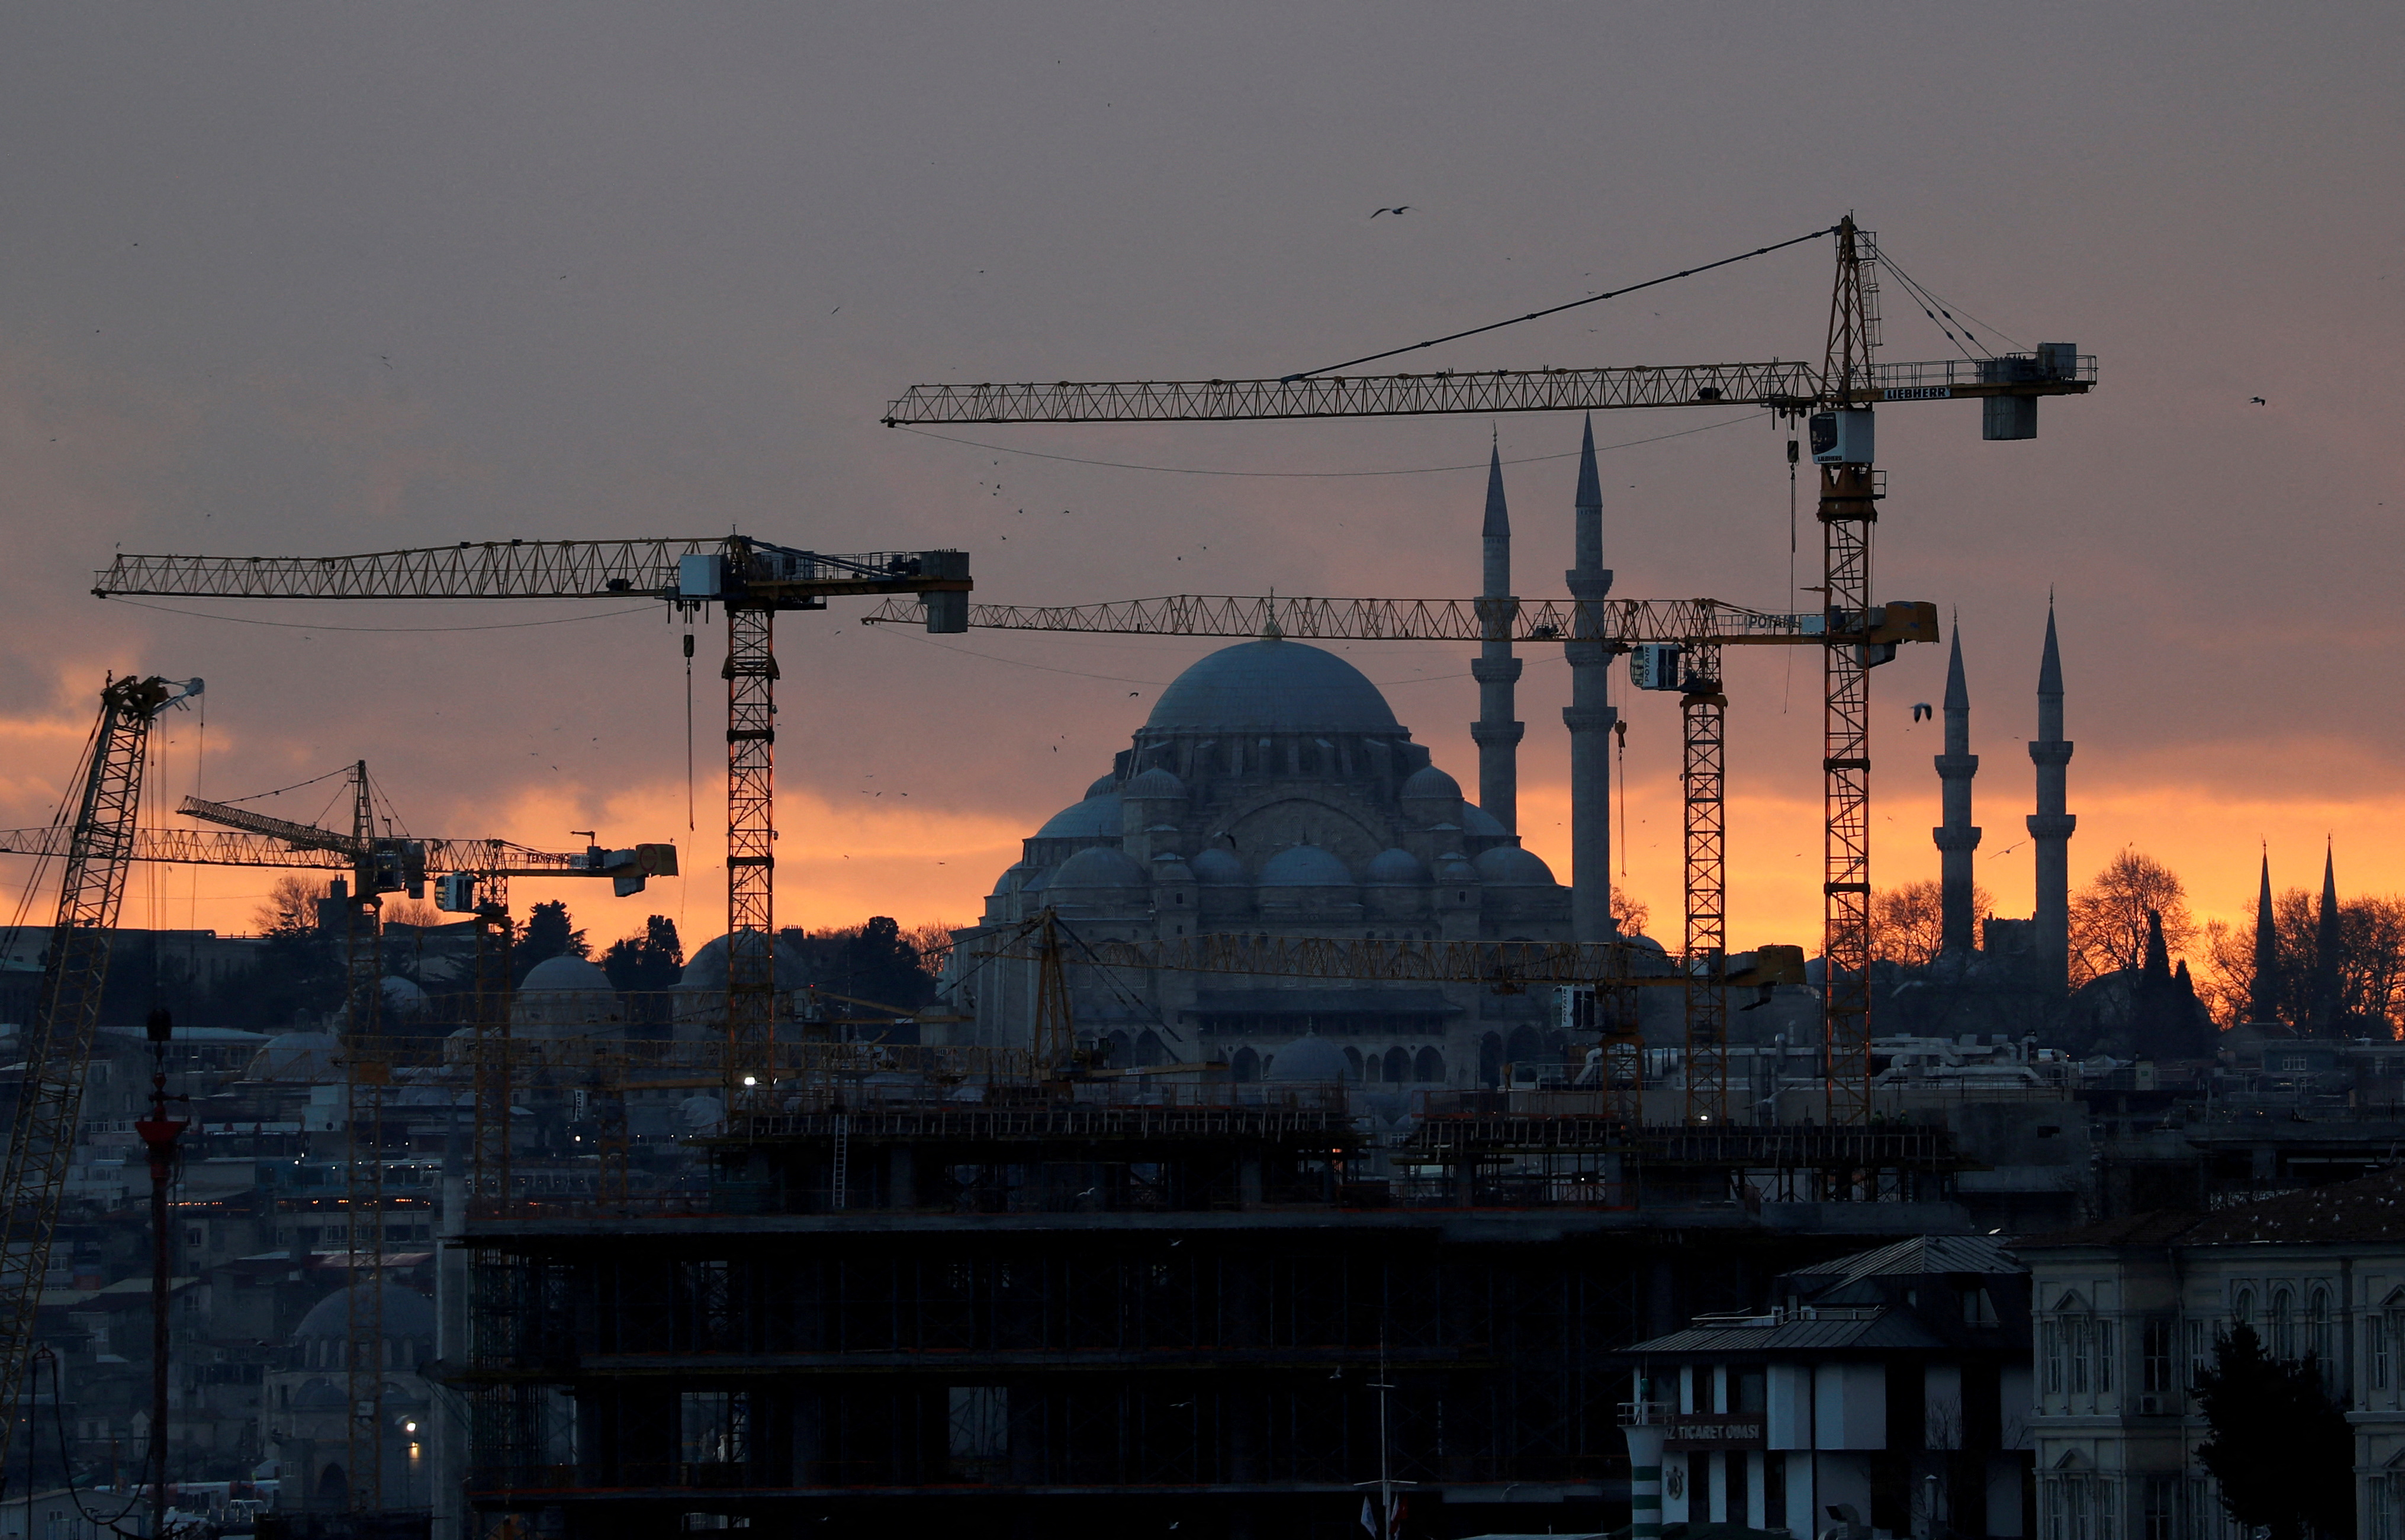 The sun sets behind cranes of Galata Port construction site and a mosque in Istanbul